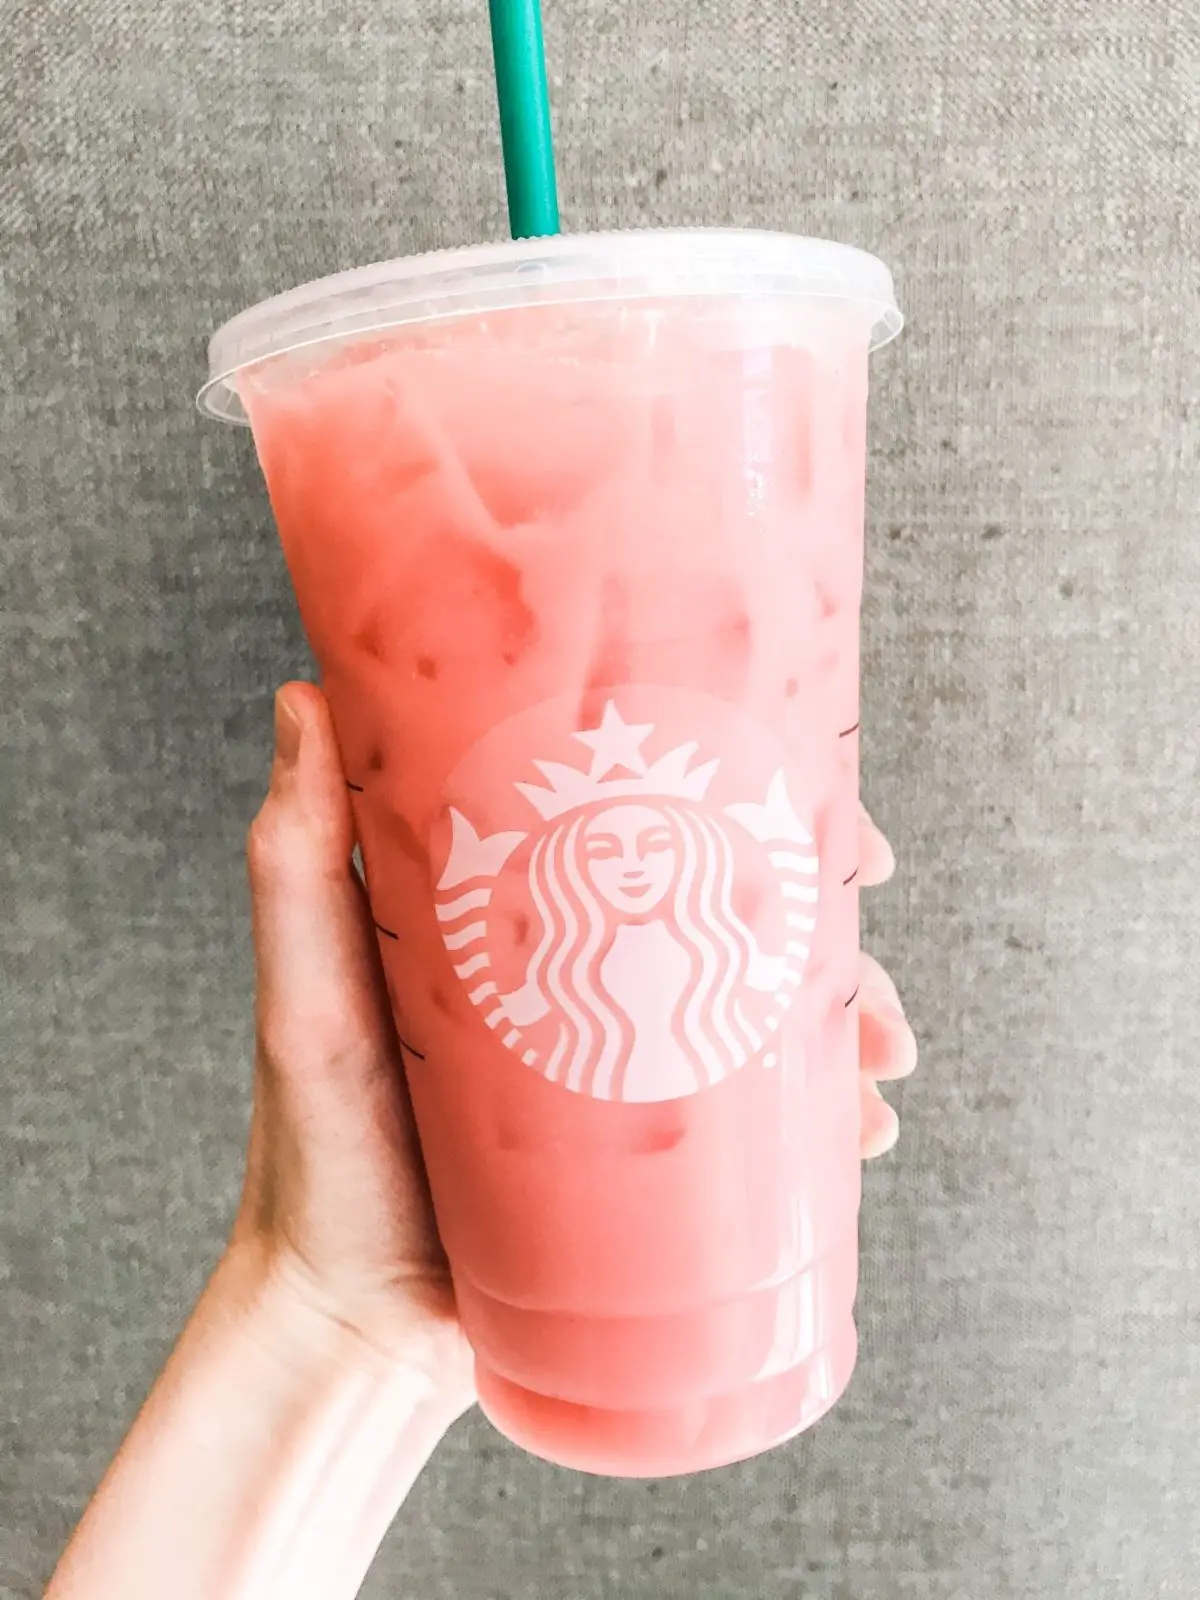 venti starbucks iced guava passionfruit drink with a grey textured background